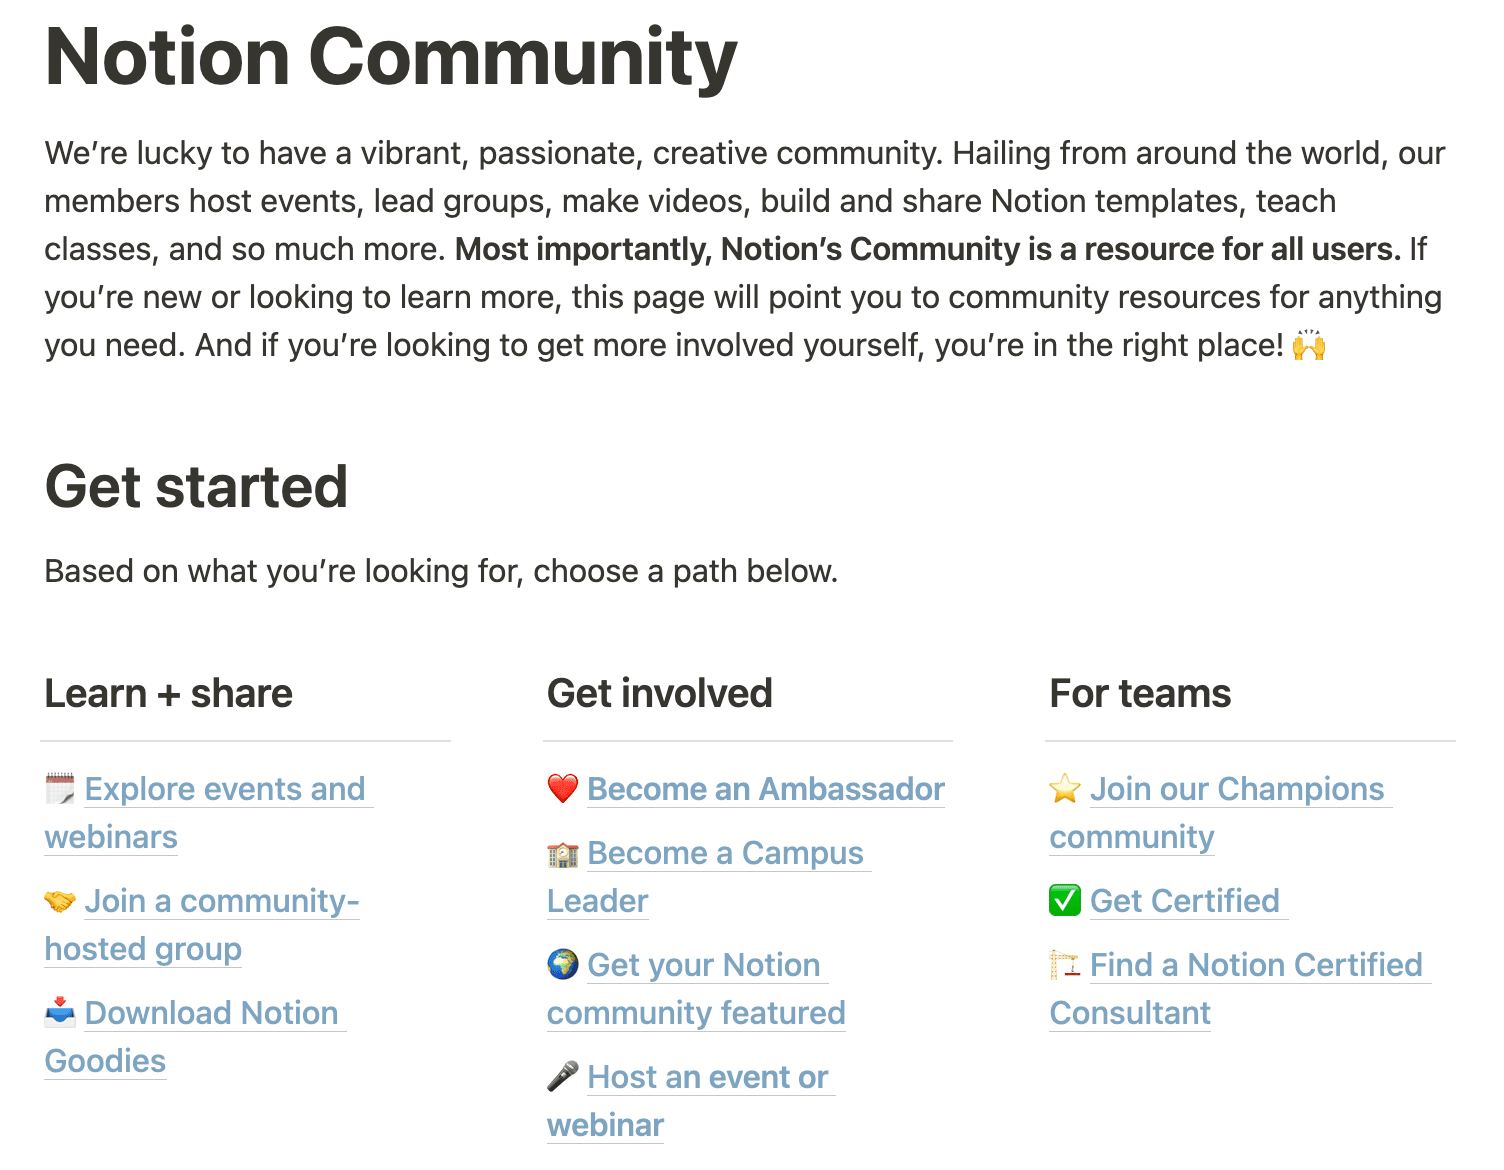 Notion is an example of an effective success community offering a variety of ways to connect and get involved.